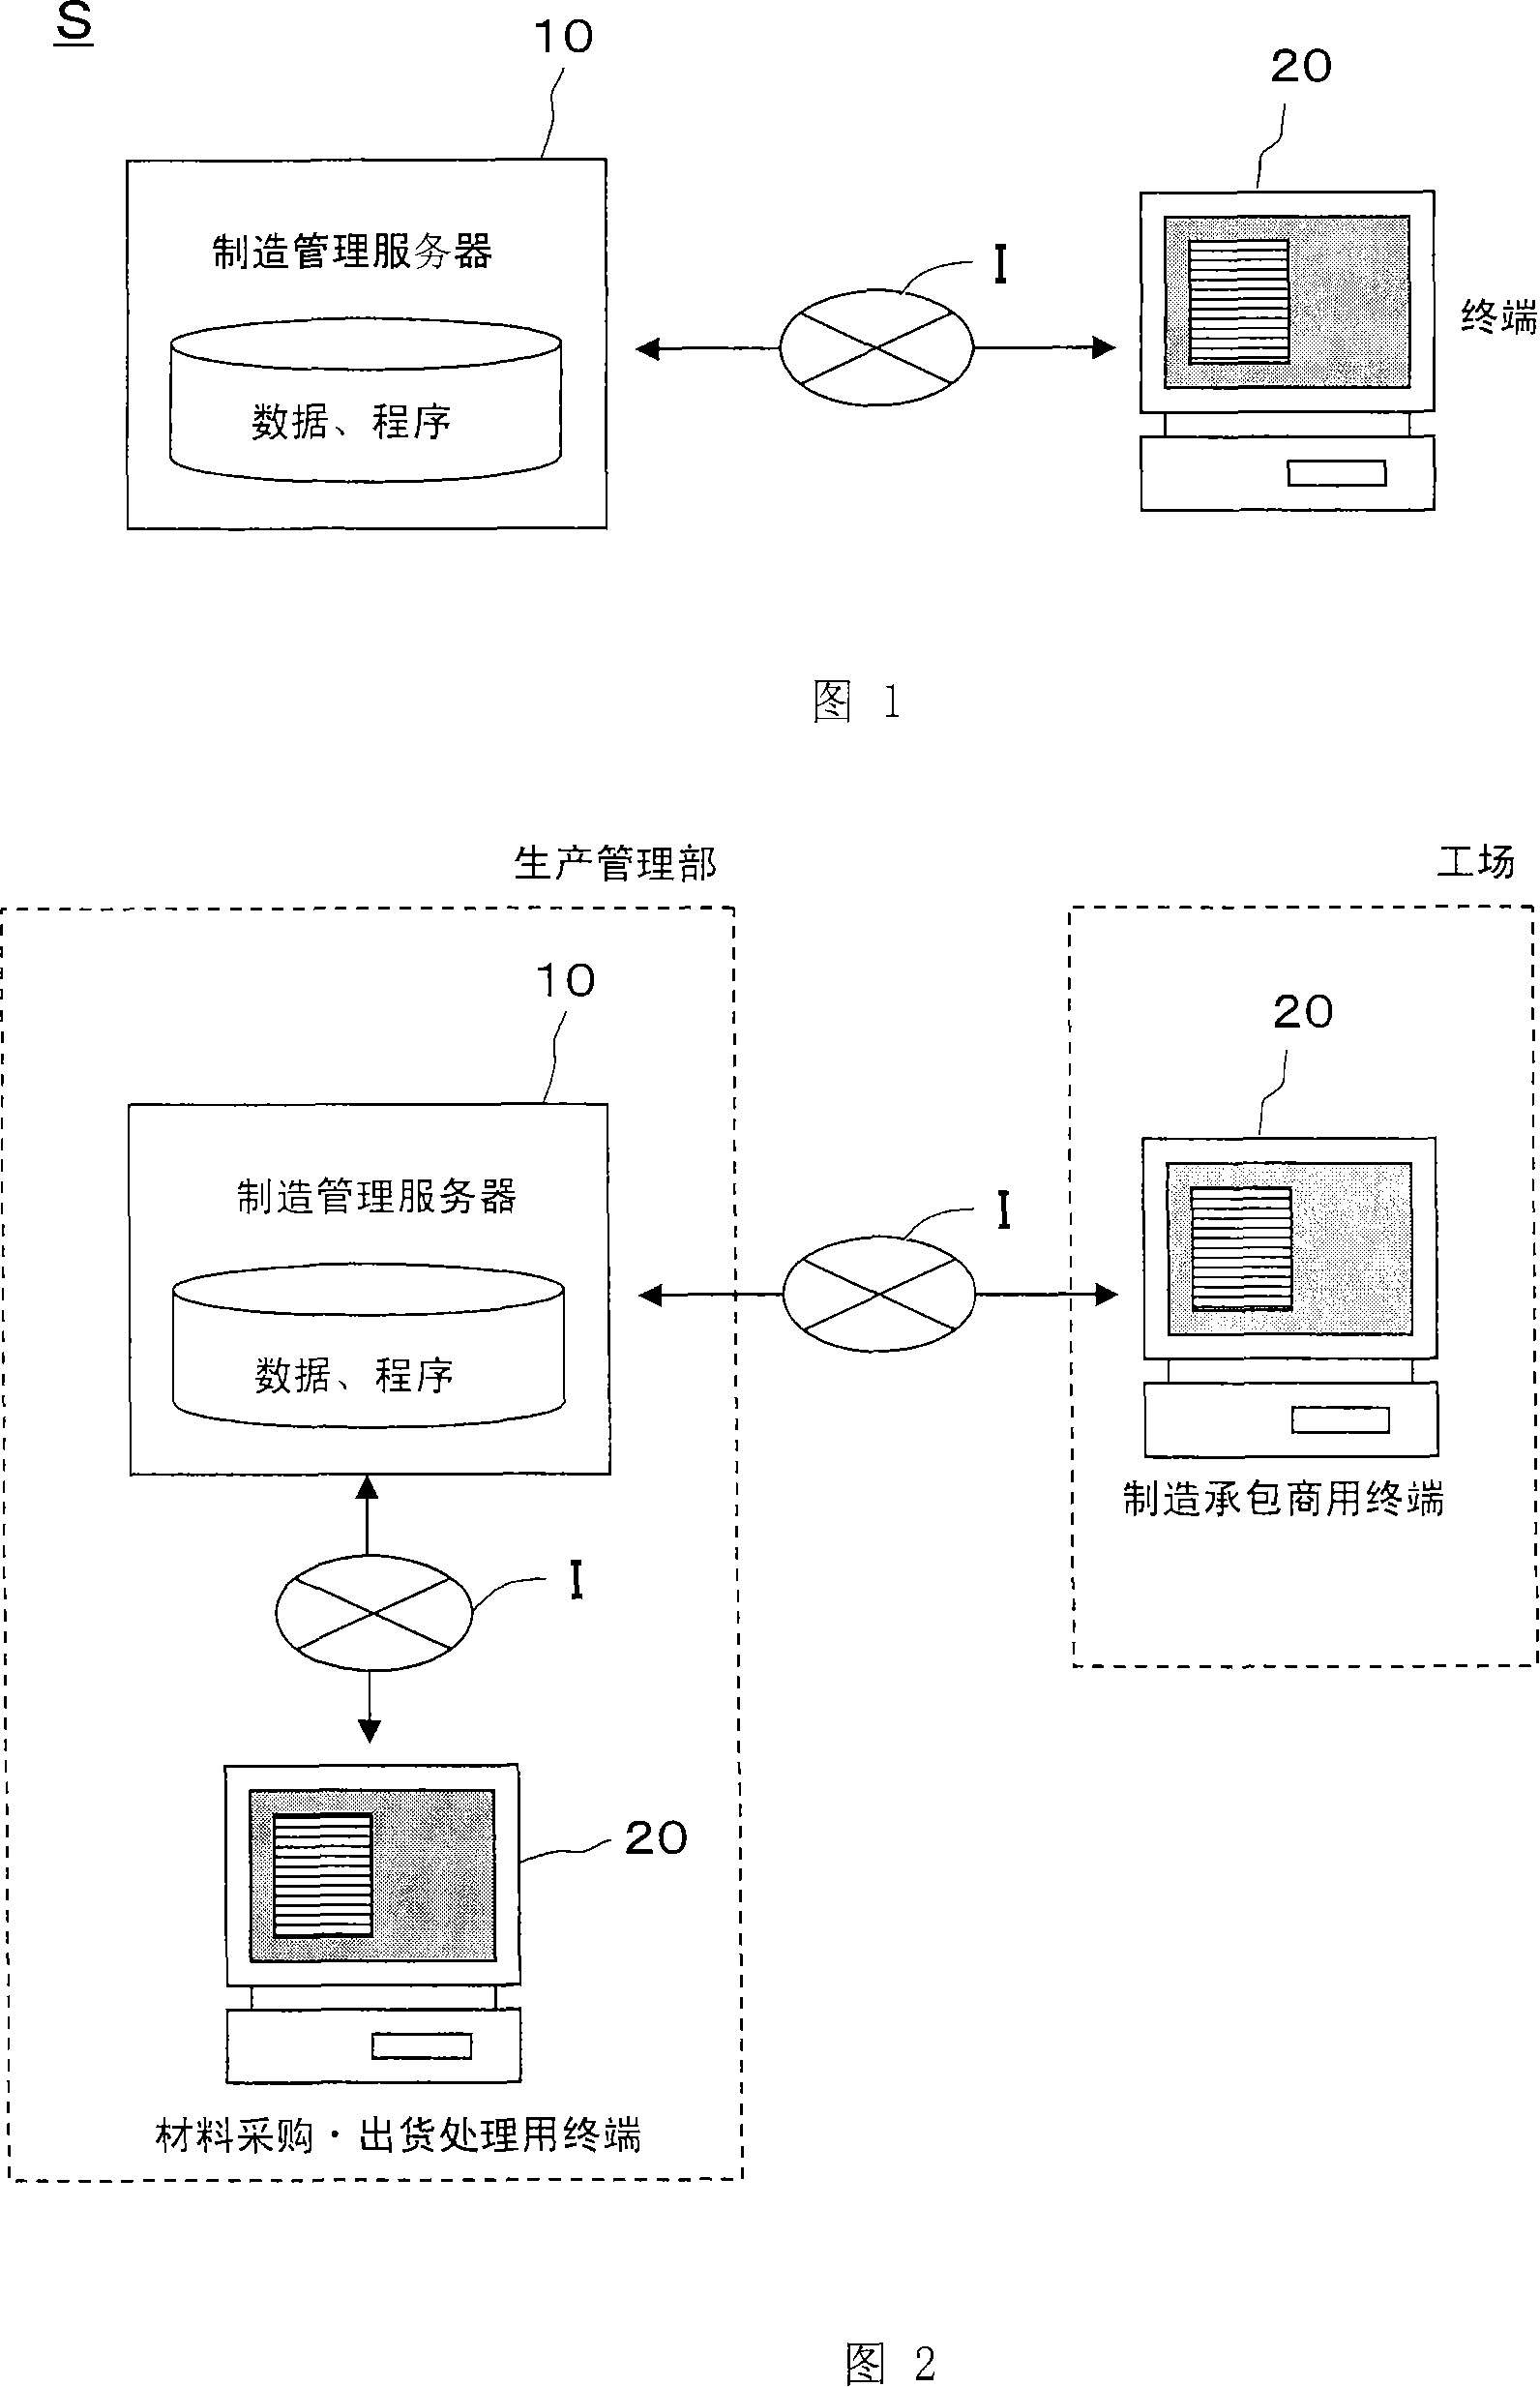 Production/shipment system and method